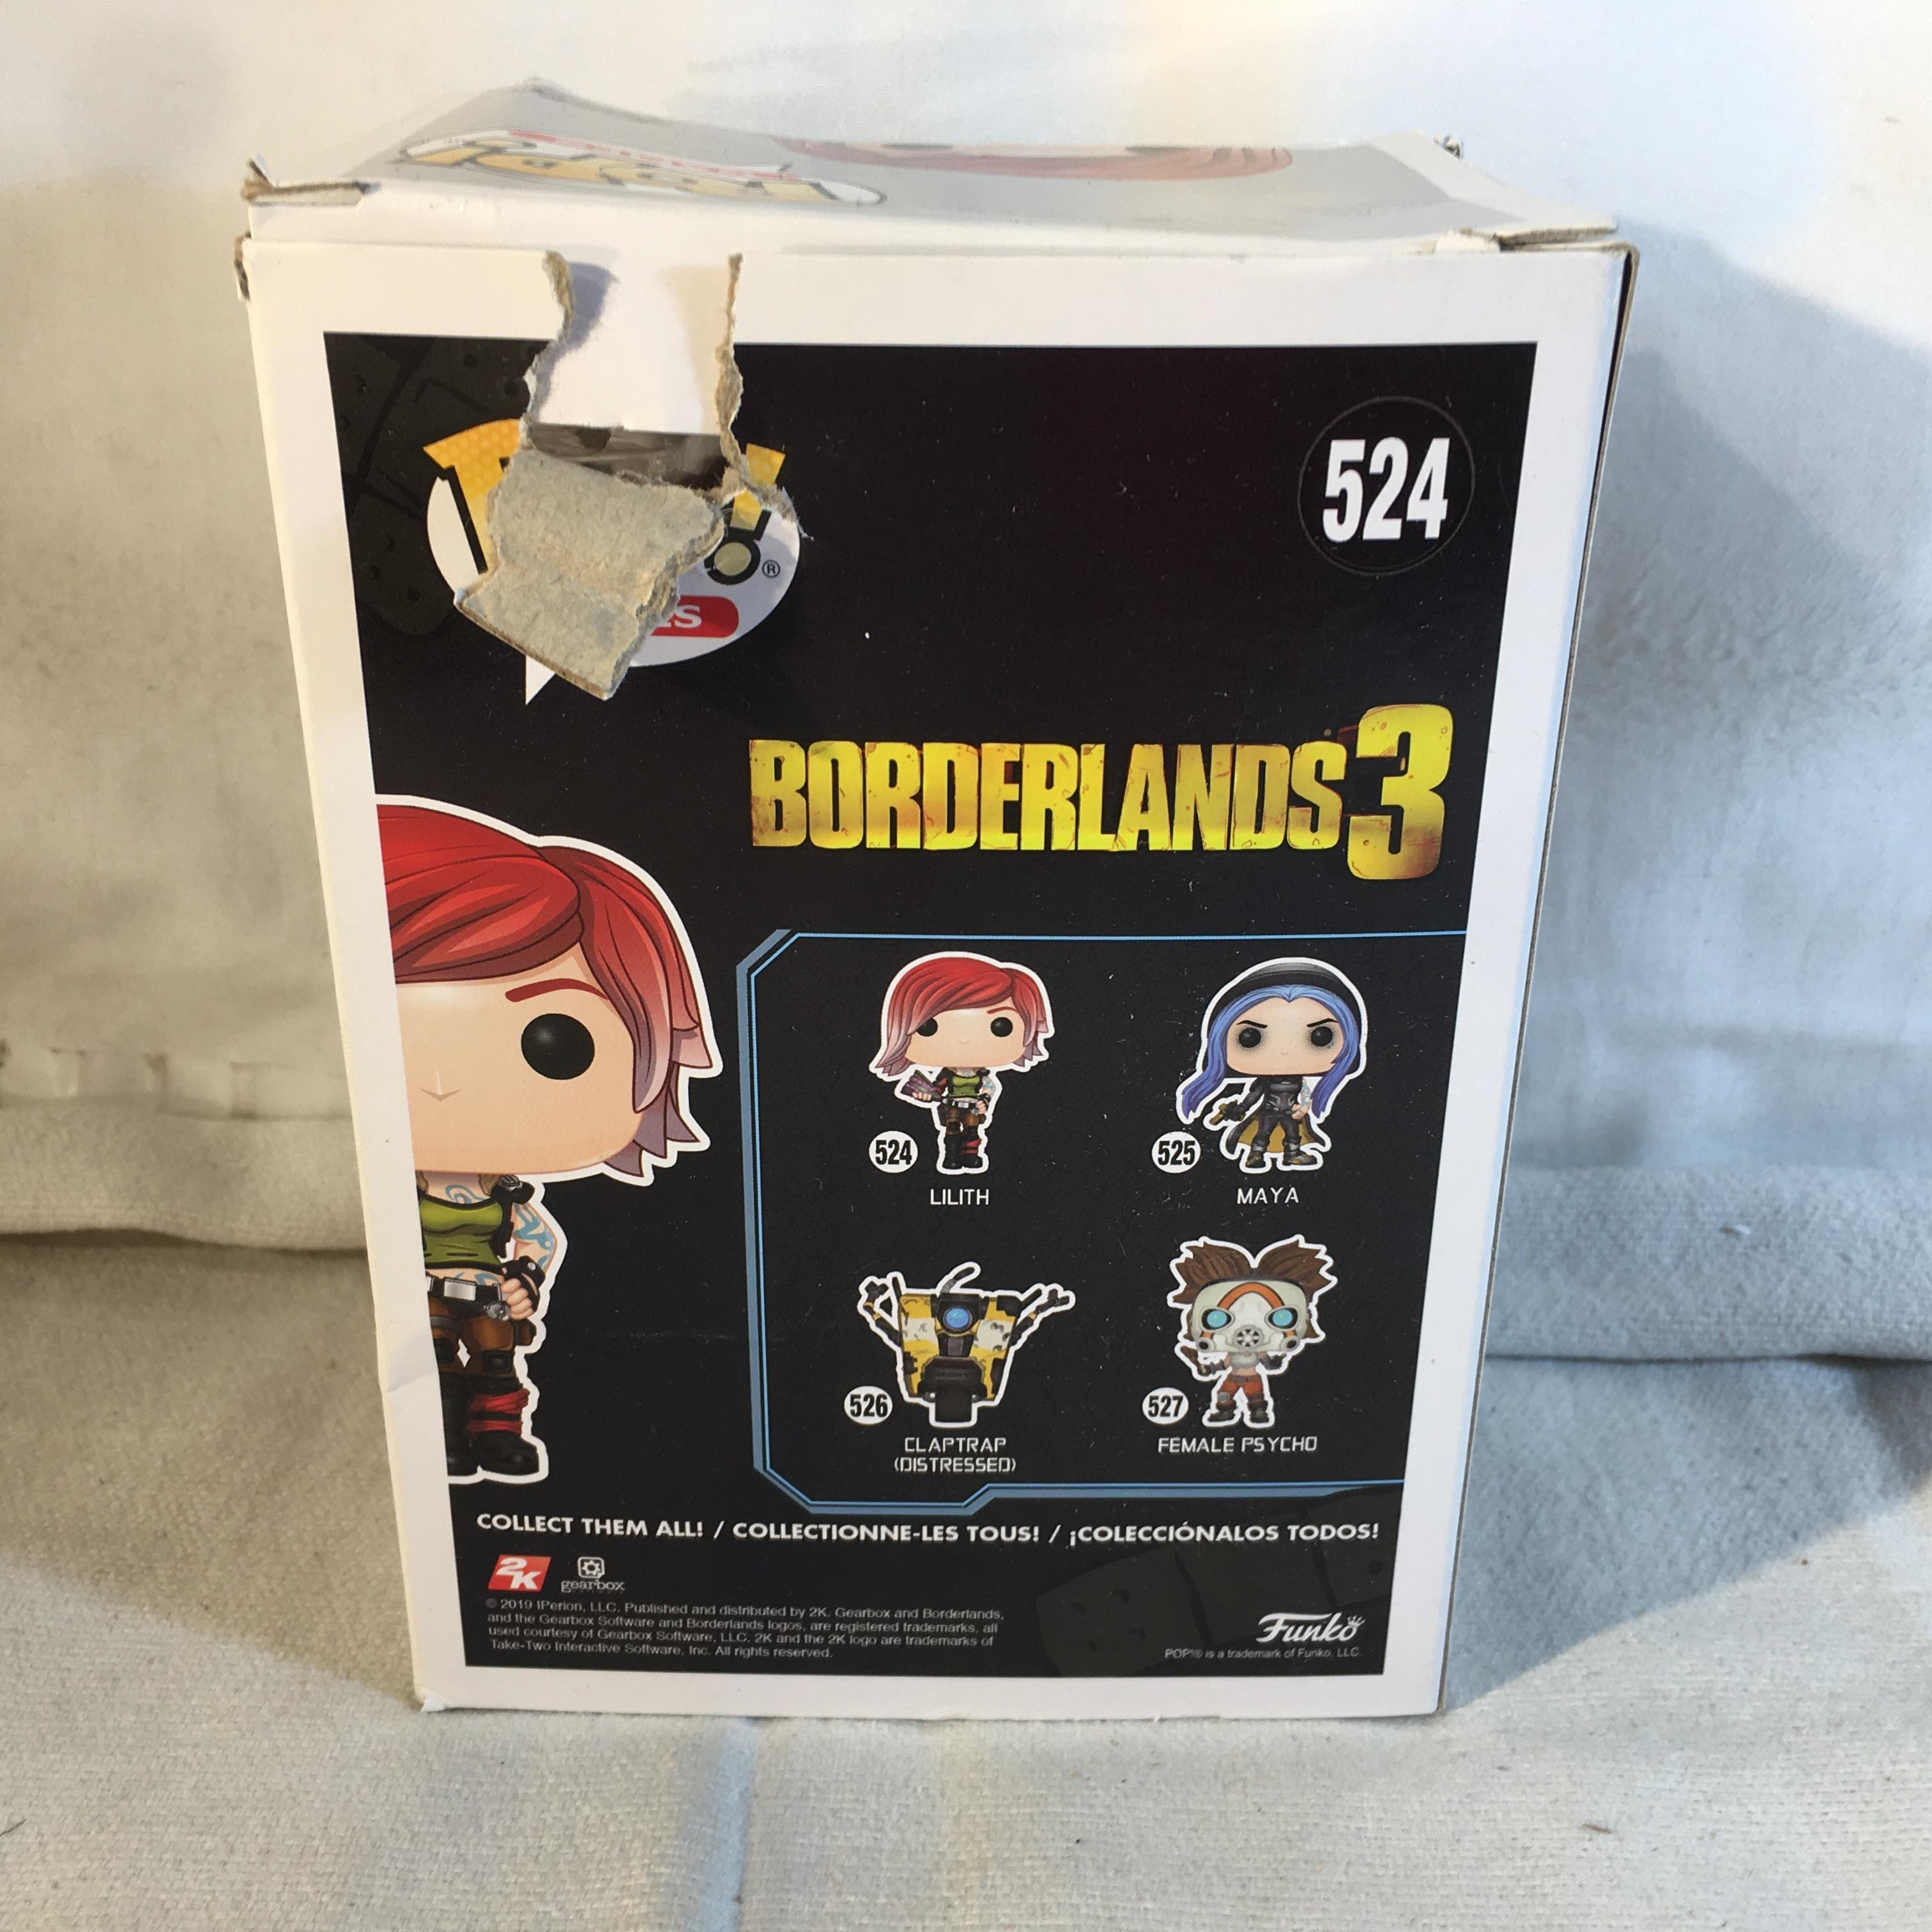 Collector Box is Damage POP Game Borderlands3 #524 Lilith Vinyl Figure 6.1/2" Tall Funko